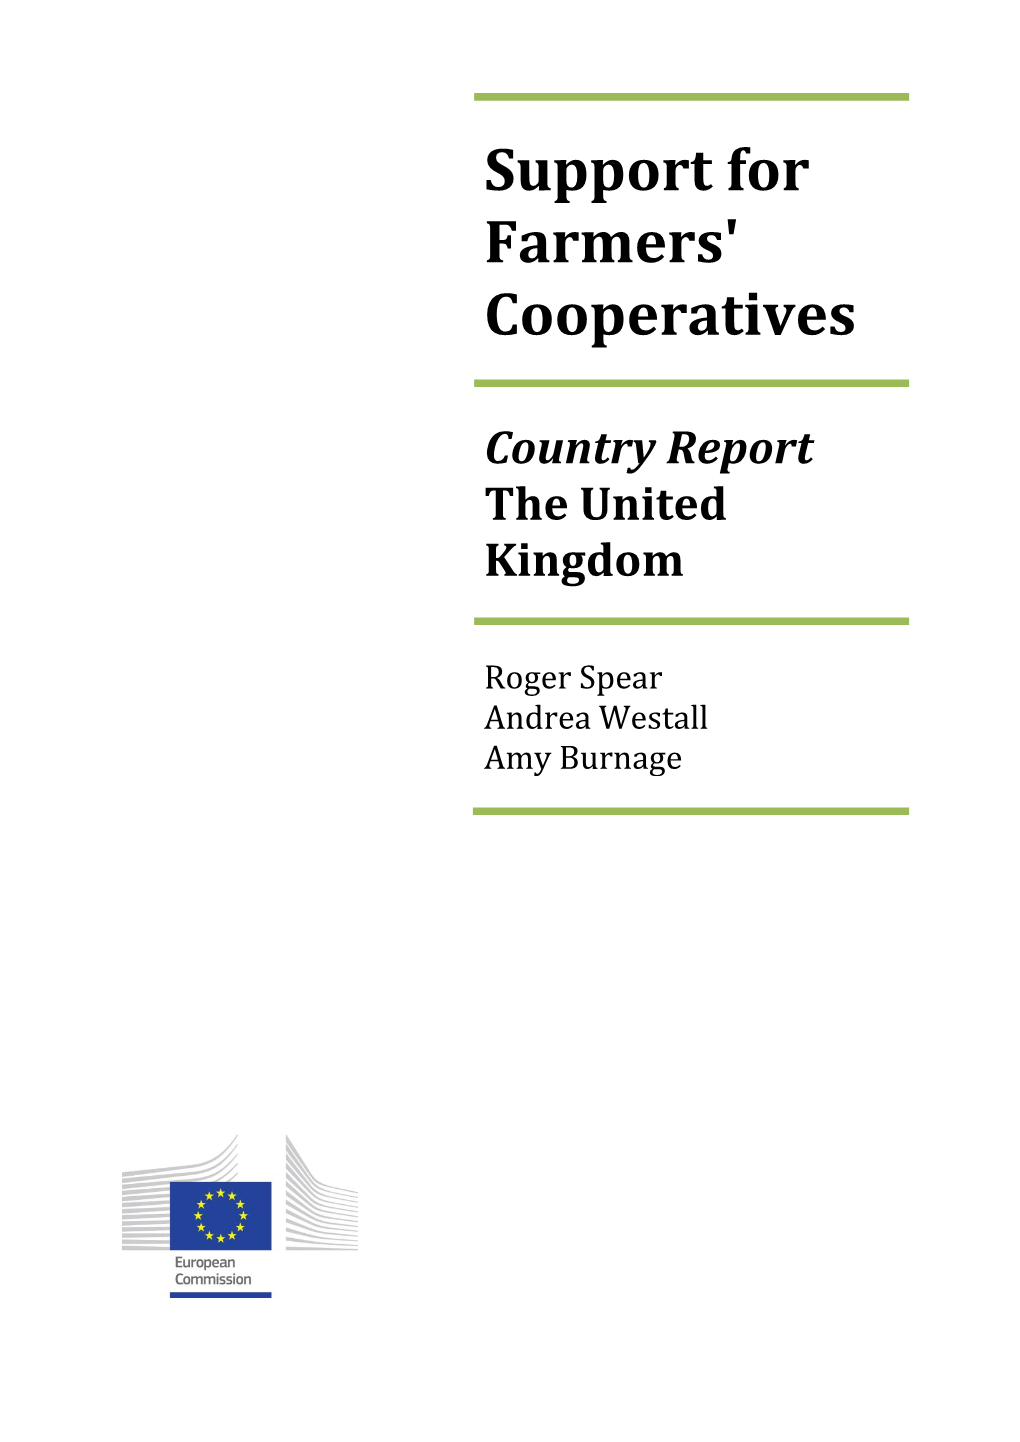 Support for Farmers' Cooperatives Country Report the United Kingdom